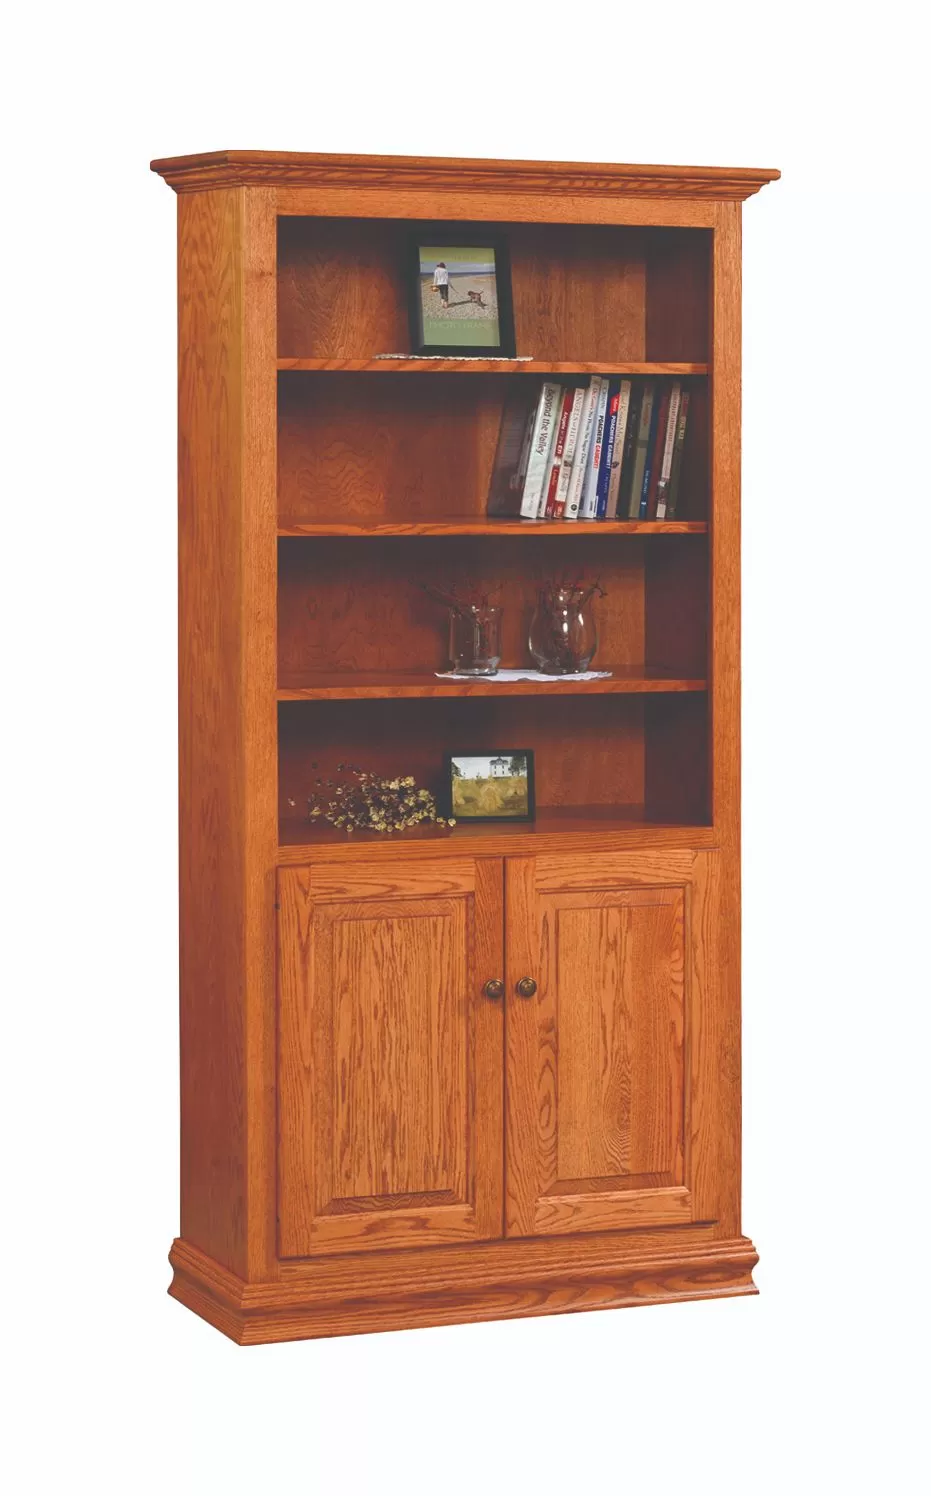 36" Traditional Bookcase with Doors